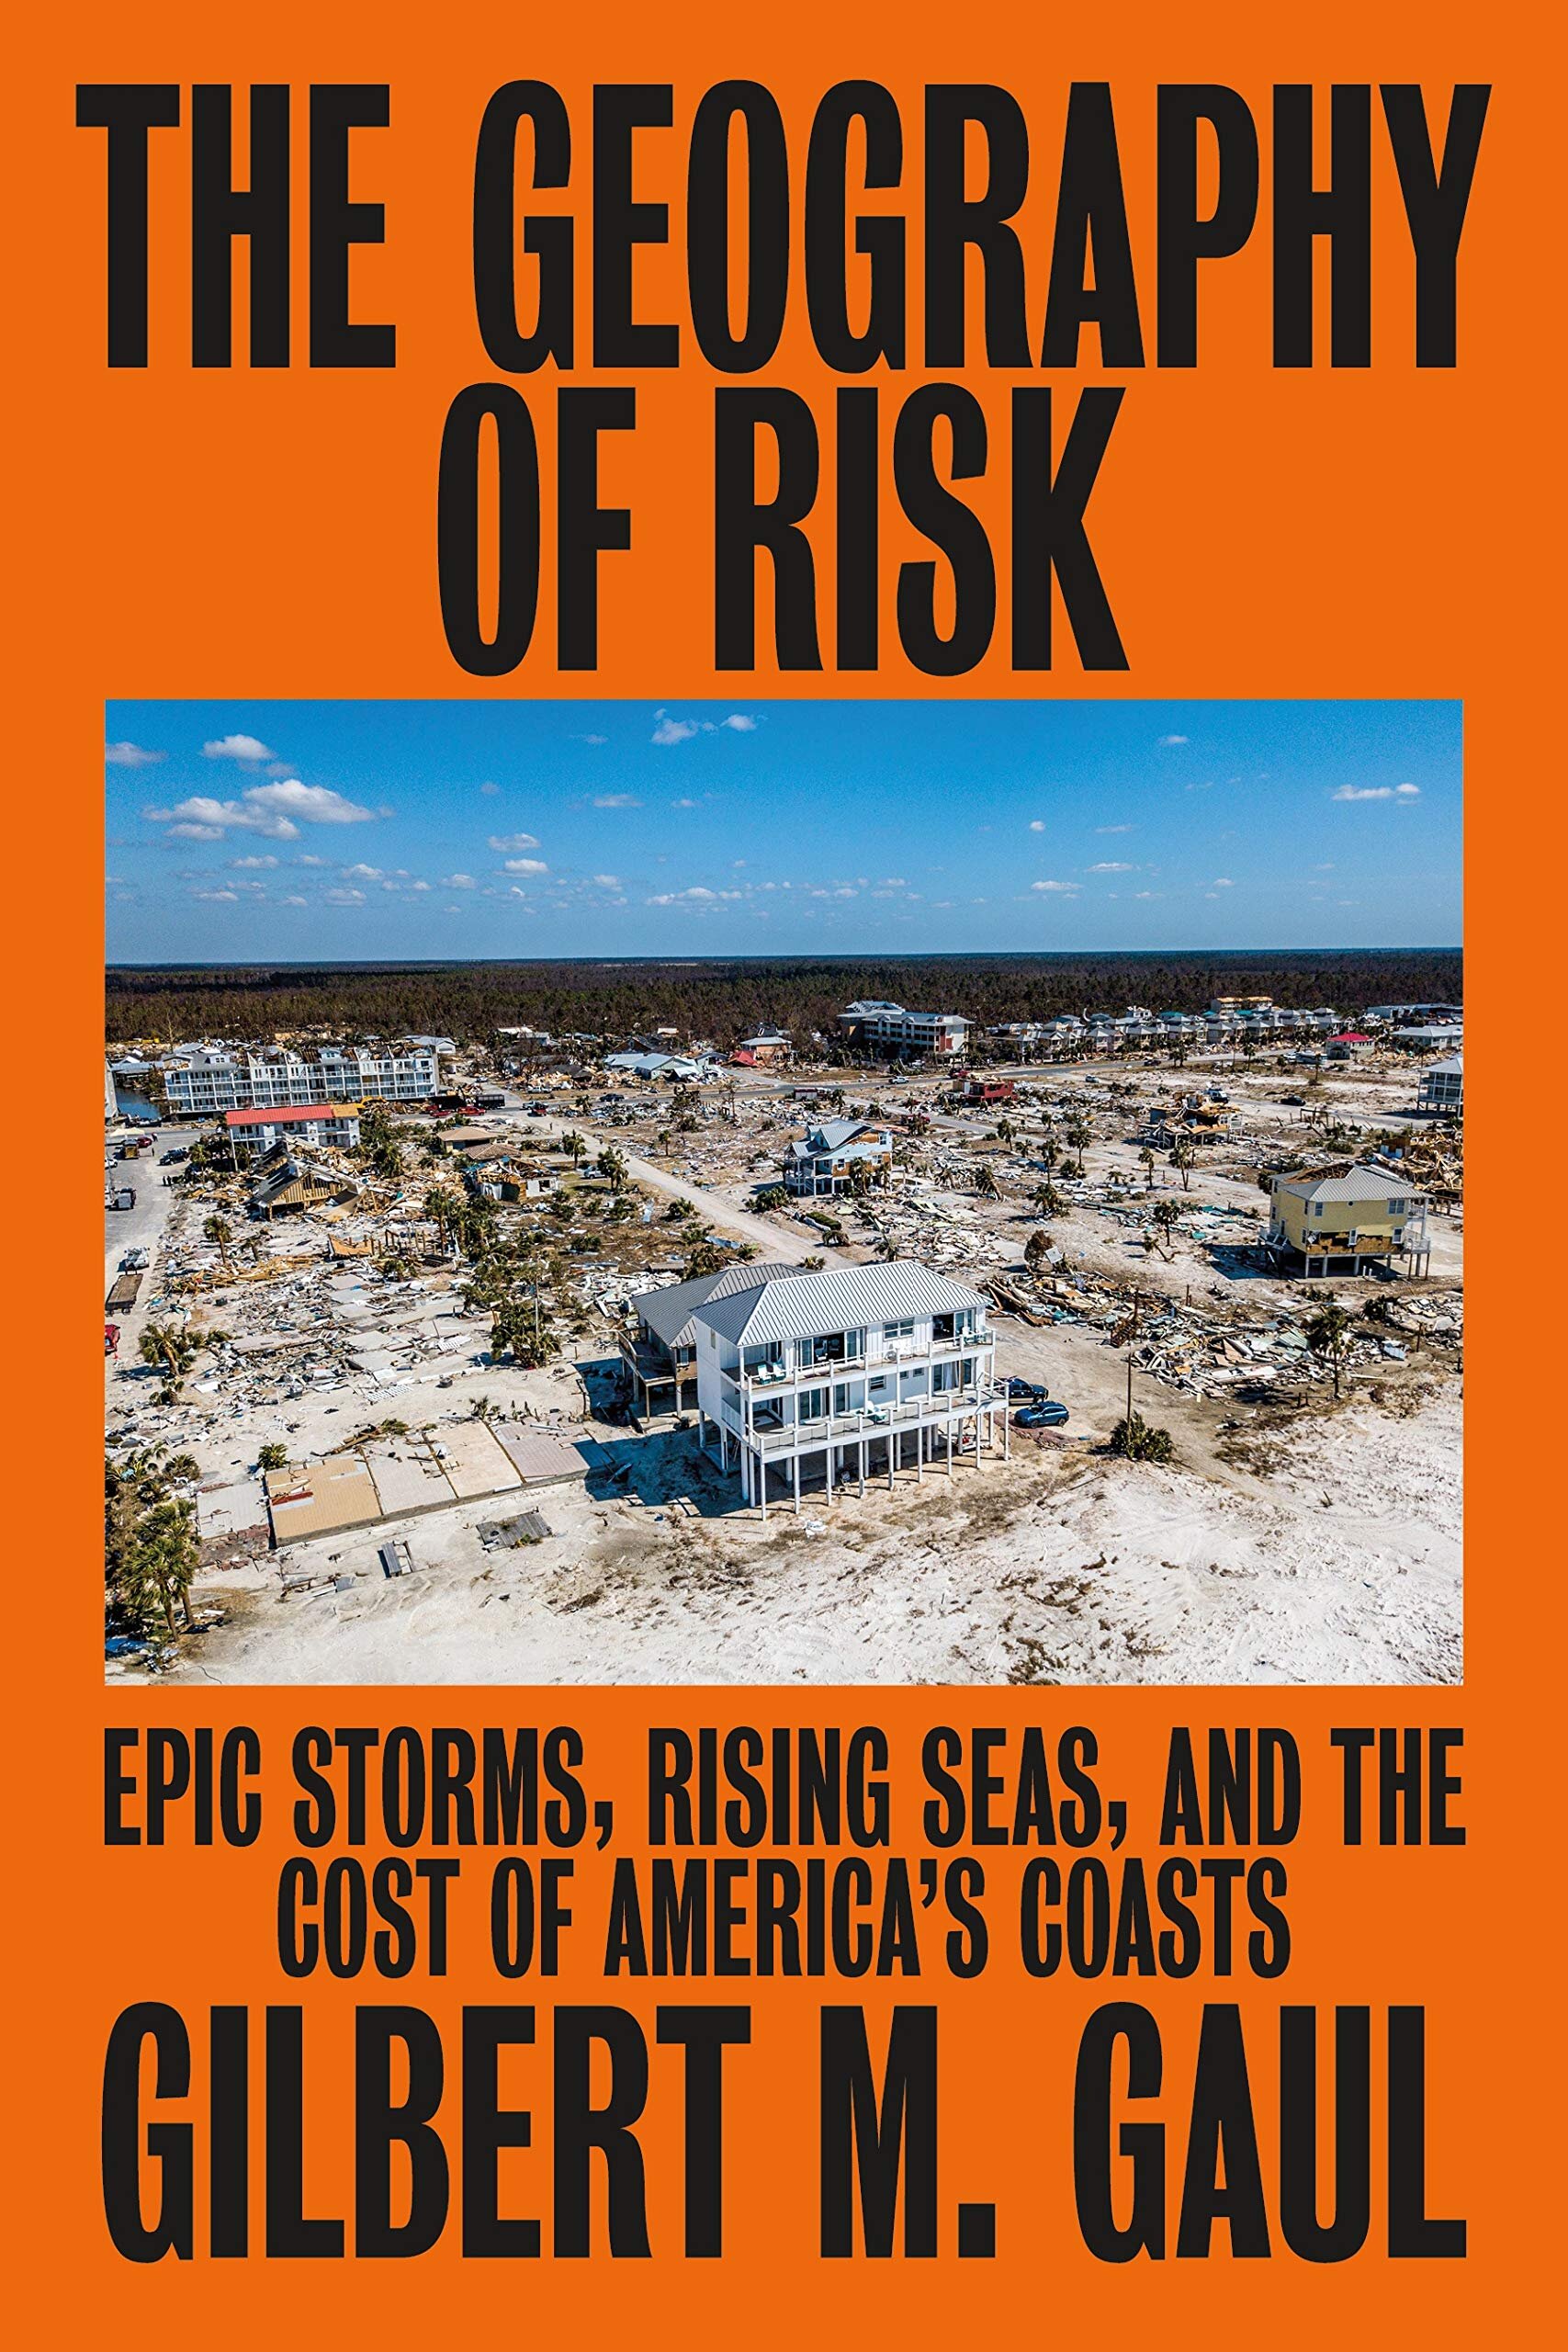 Science The Geography of Risk Epic Storms Rising Seas and the Cost of America's Coasts by Gilbert M. Gaul.jpg